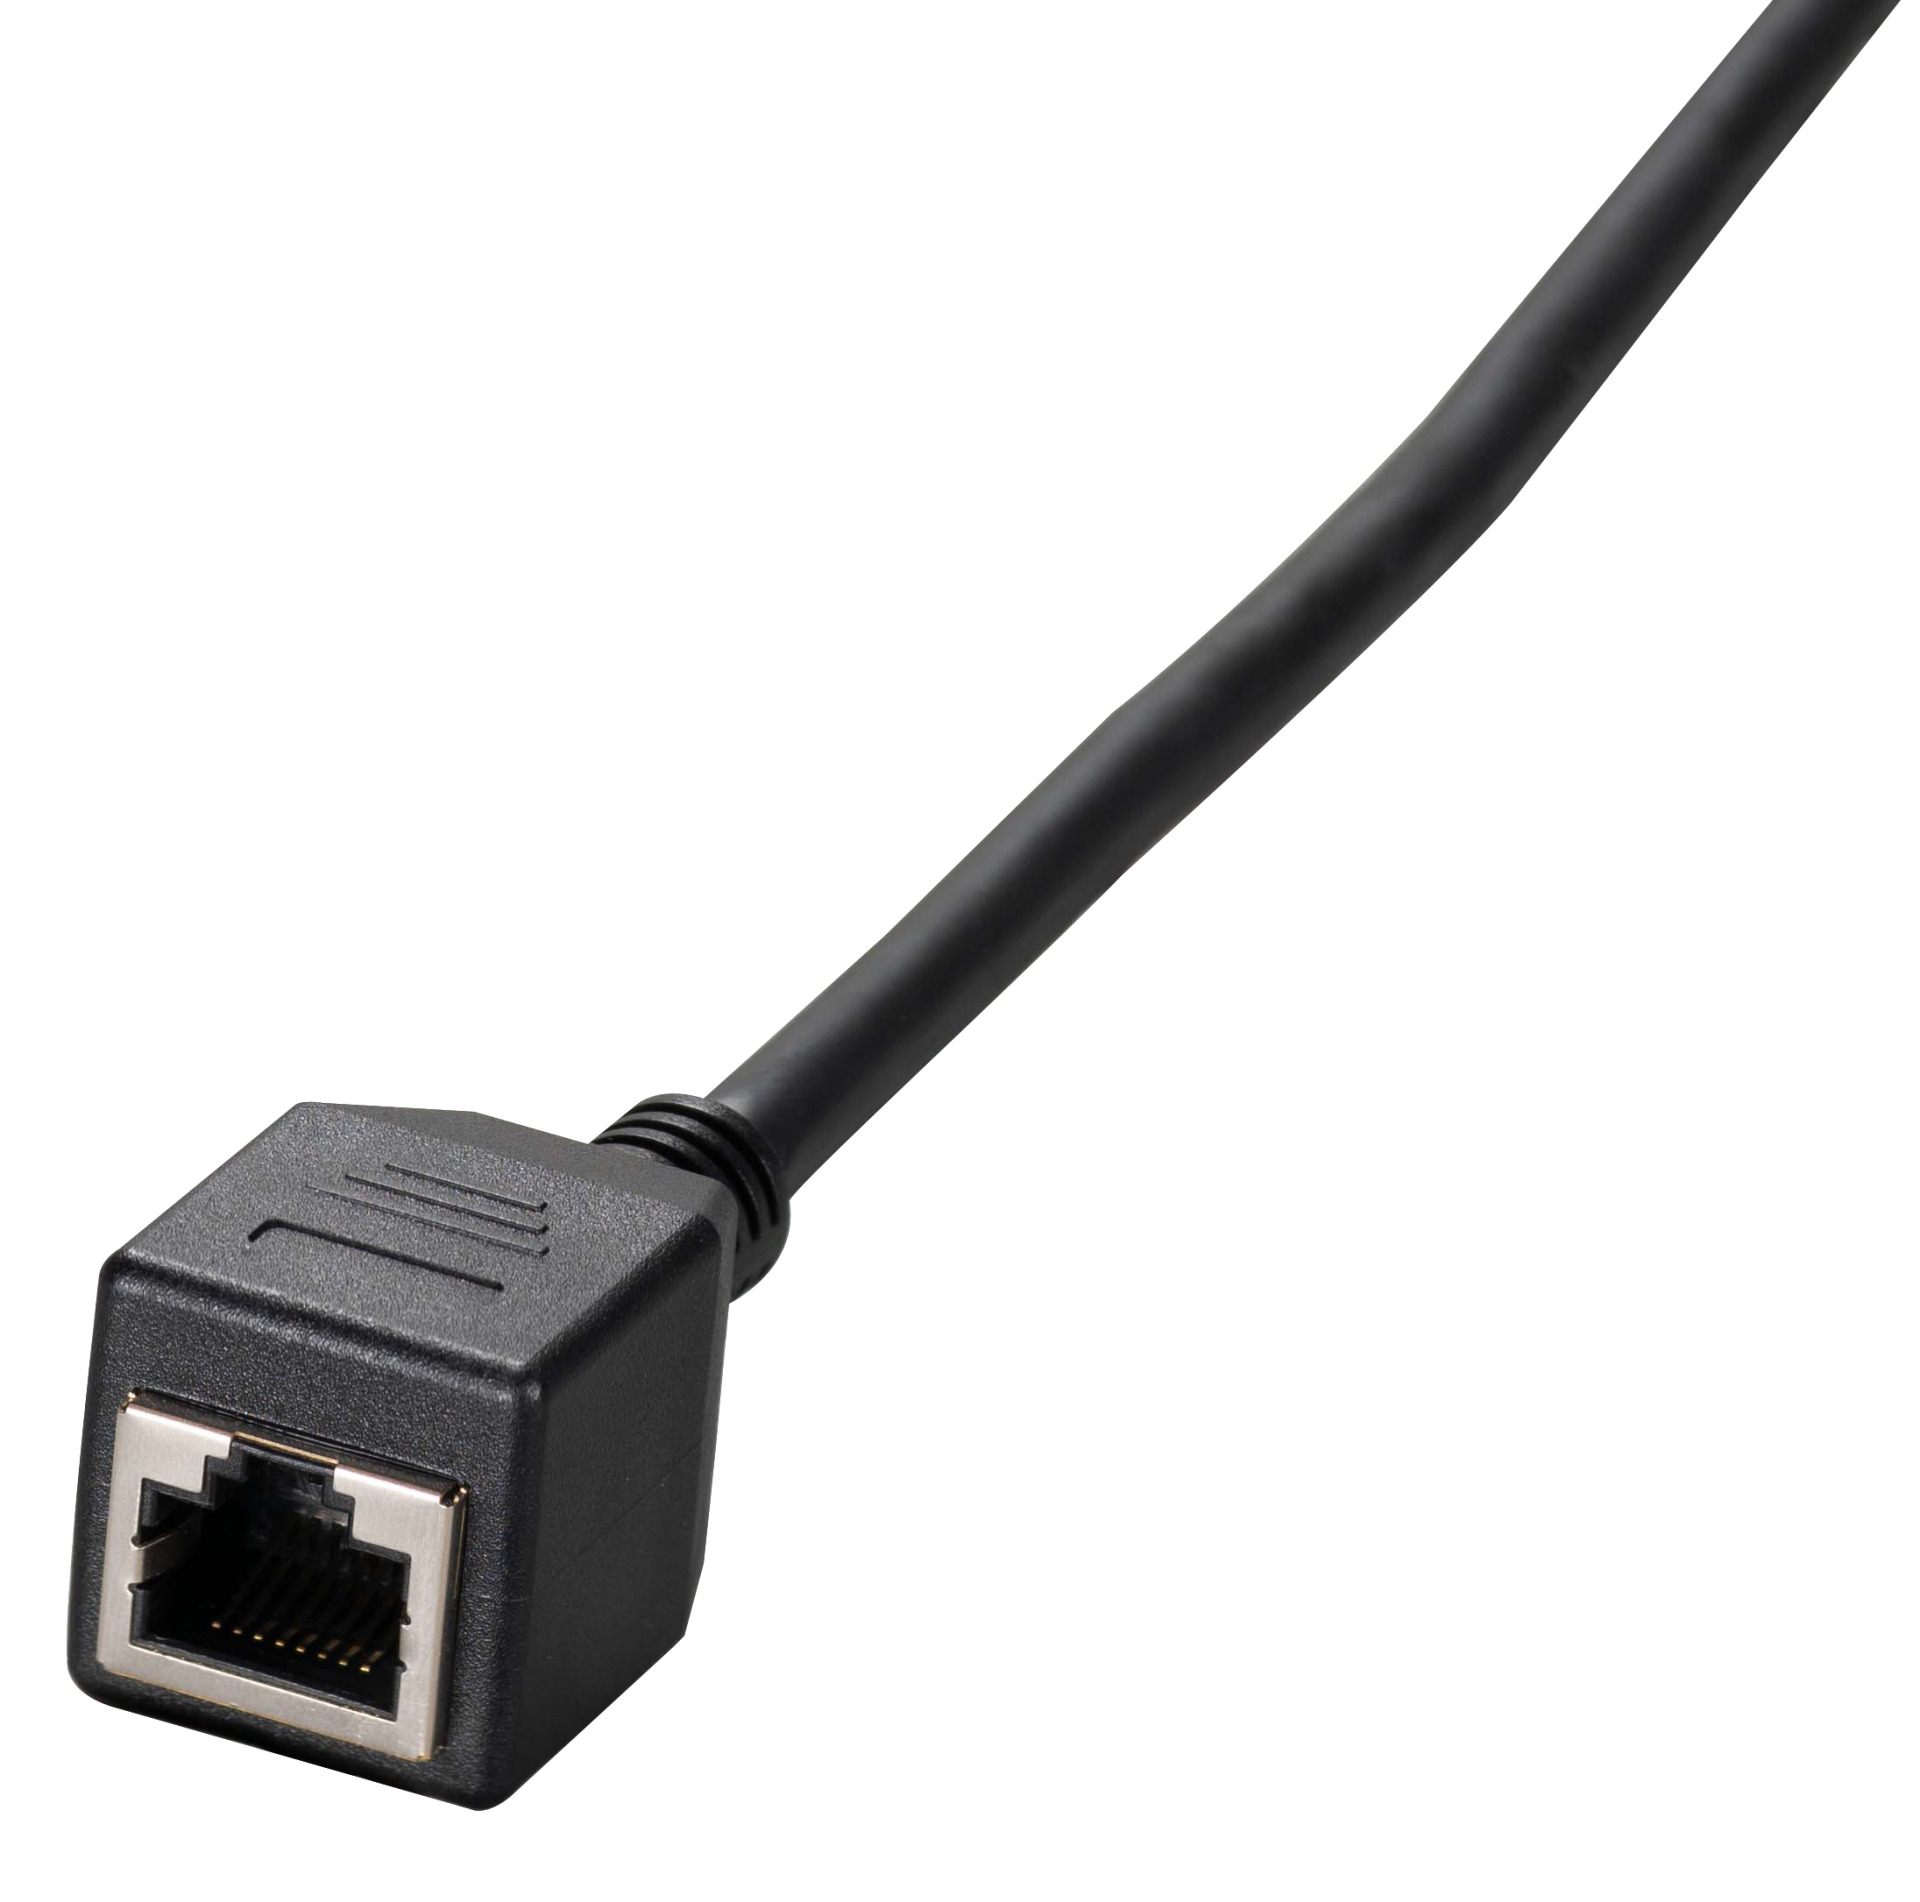 RJ45 patch cable extension Cat.6A, S/FTP, AWG26, black, 1m